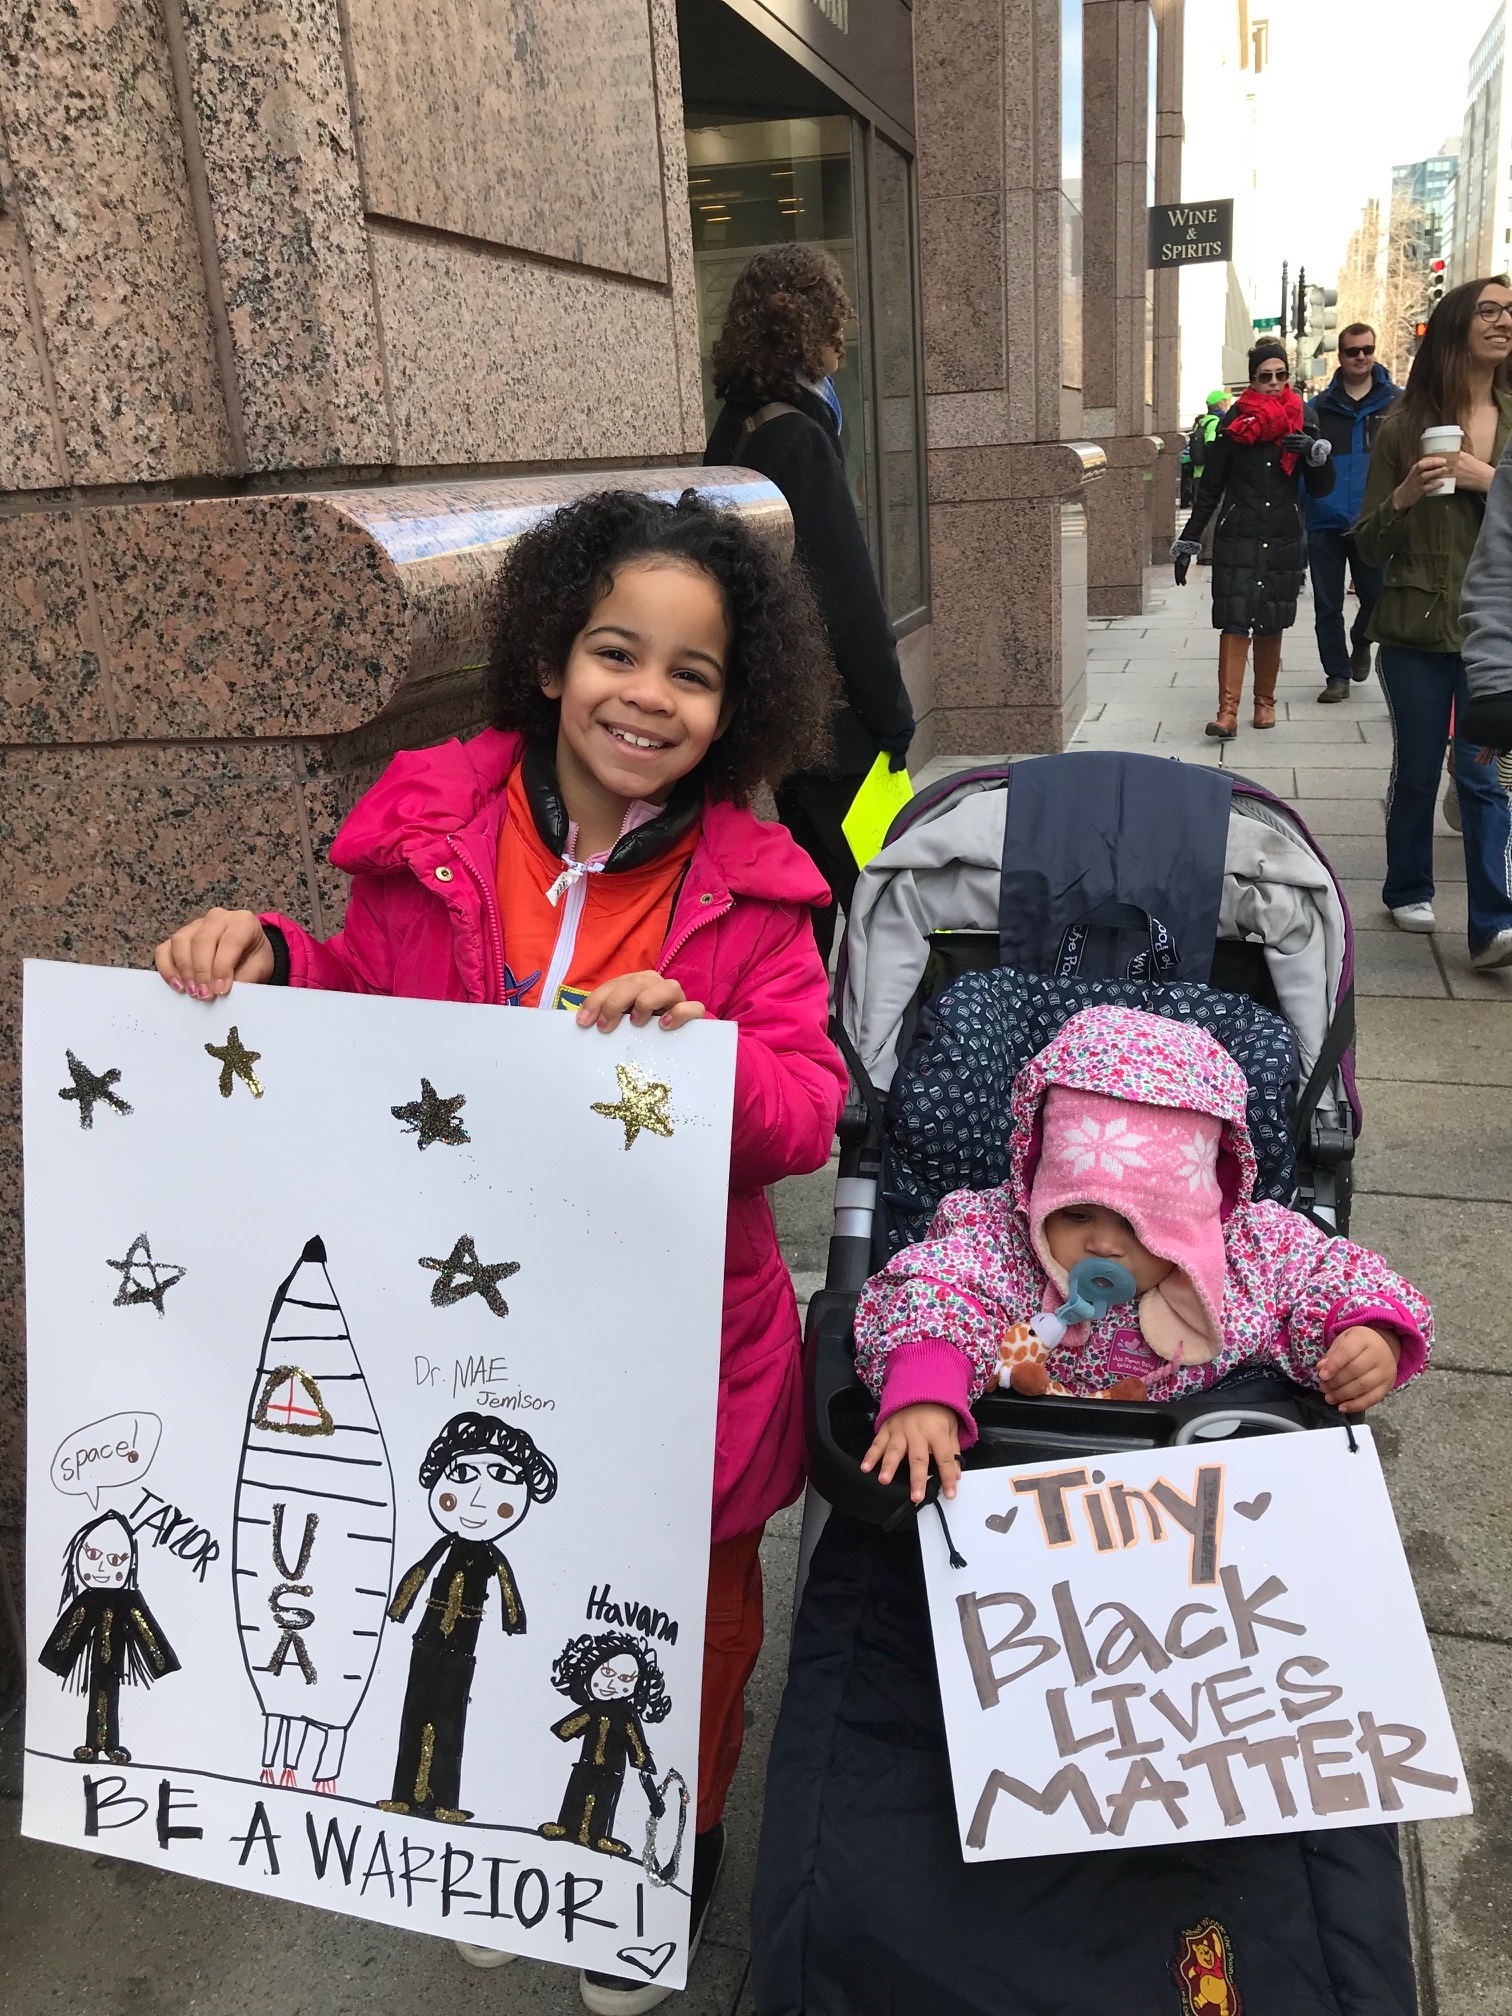 Havana Chapman-Edwards, left, attended the March for Our Lives in Washington, D.C., with her family on March 24, 2018.